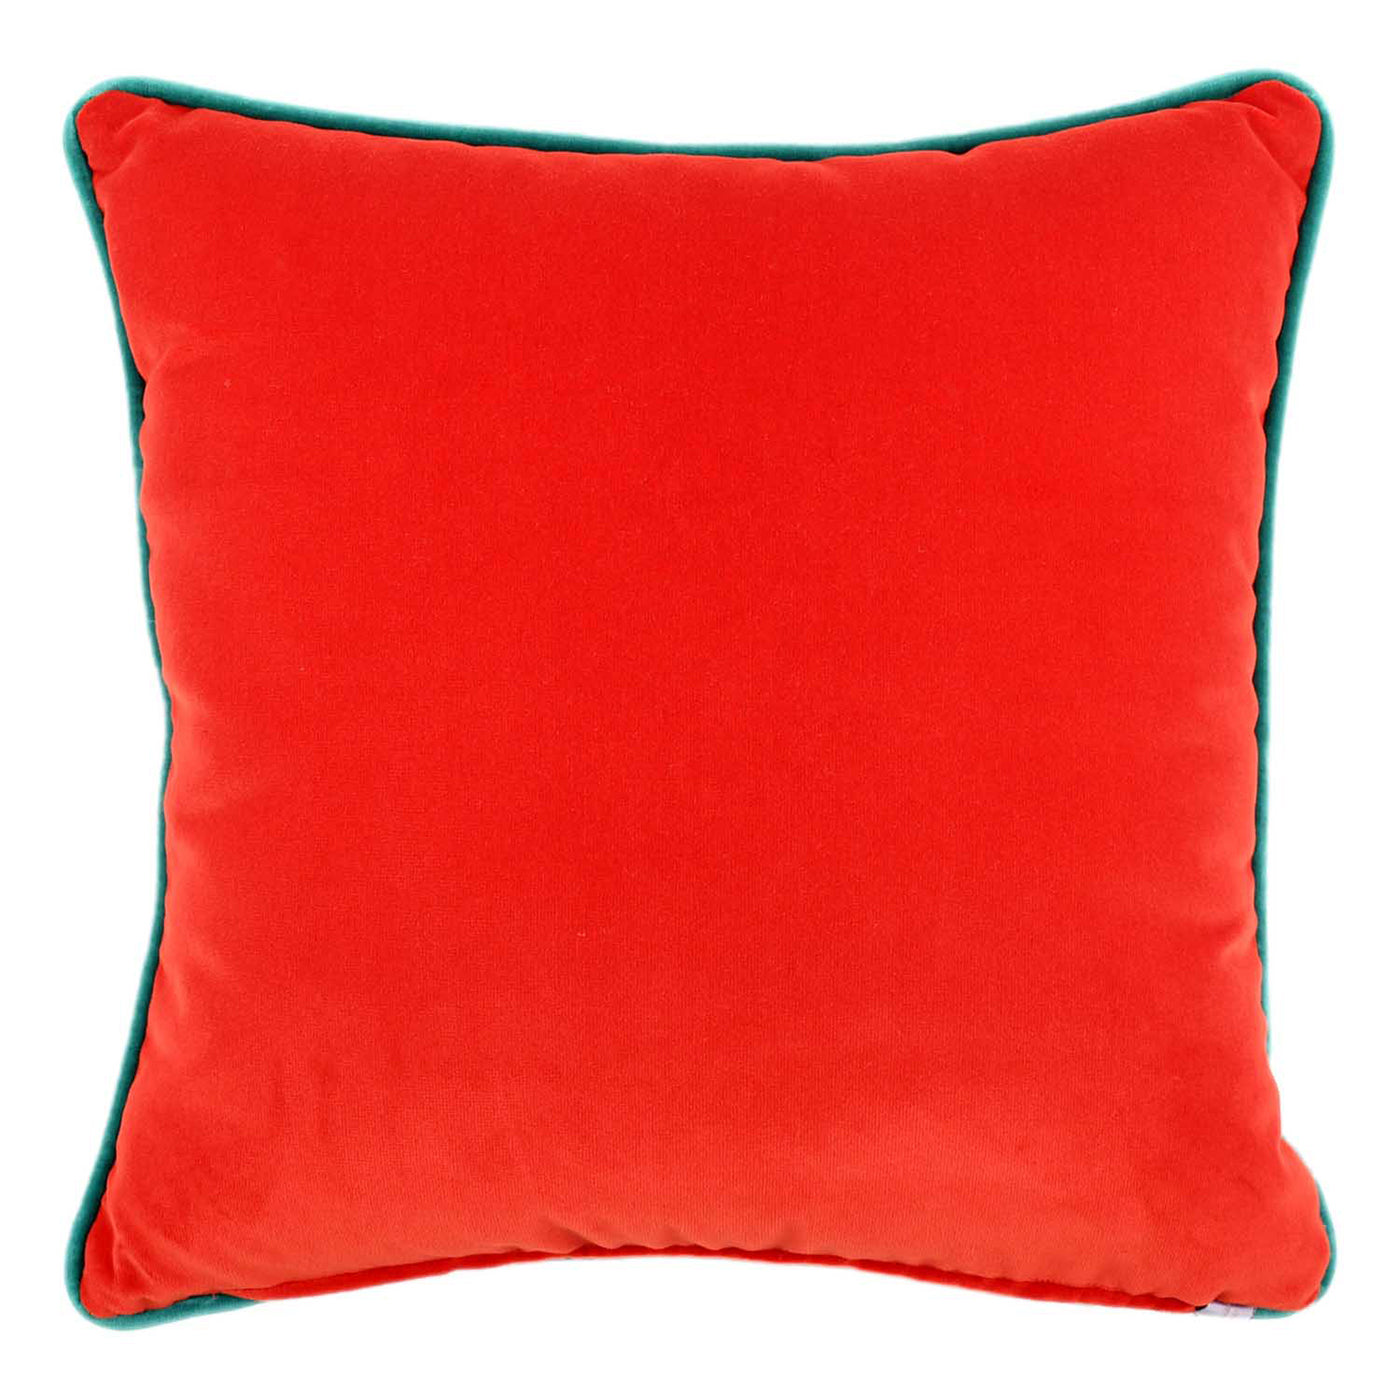 Light Blue and Red Carrè Cushion in polka dots jacquard fabric - Alternative view 1